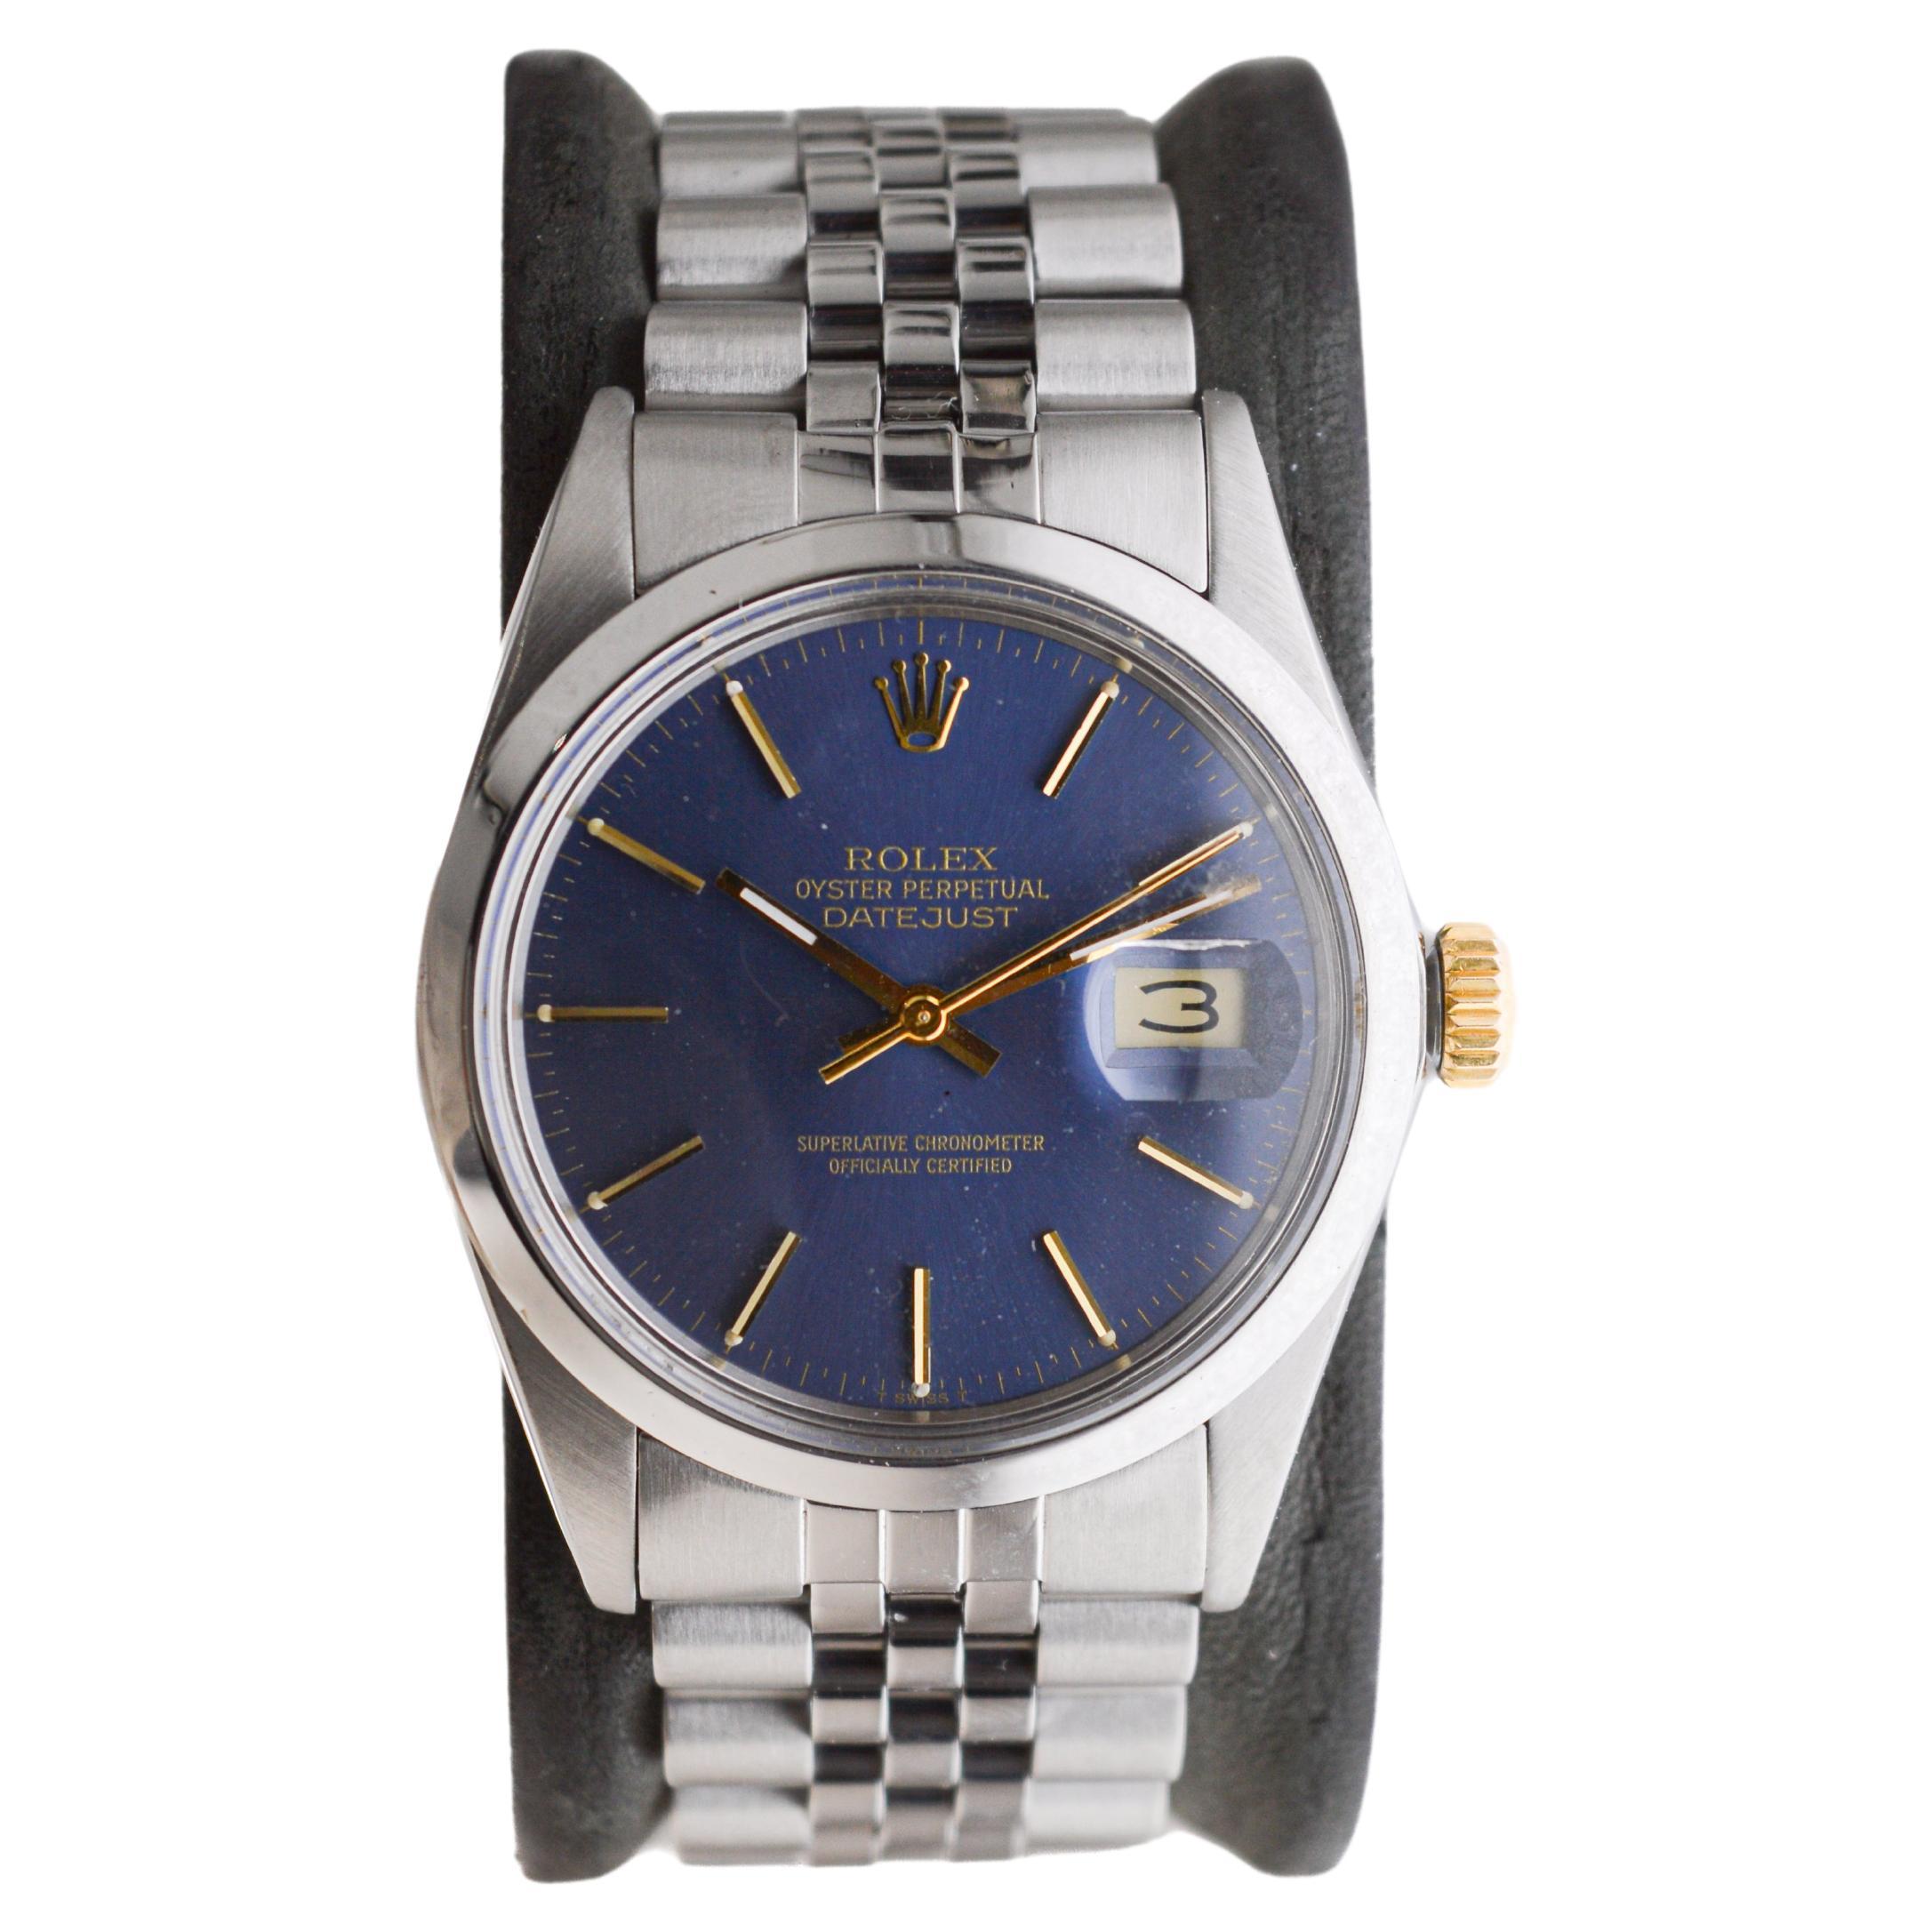 Rolex Steel Oyster Perpetual Datejust with Rare Original Blue Dial from 1987 For Sale